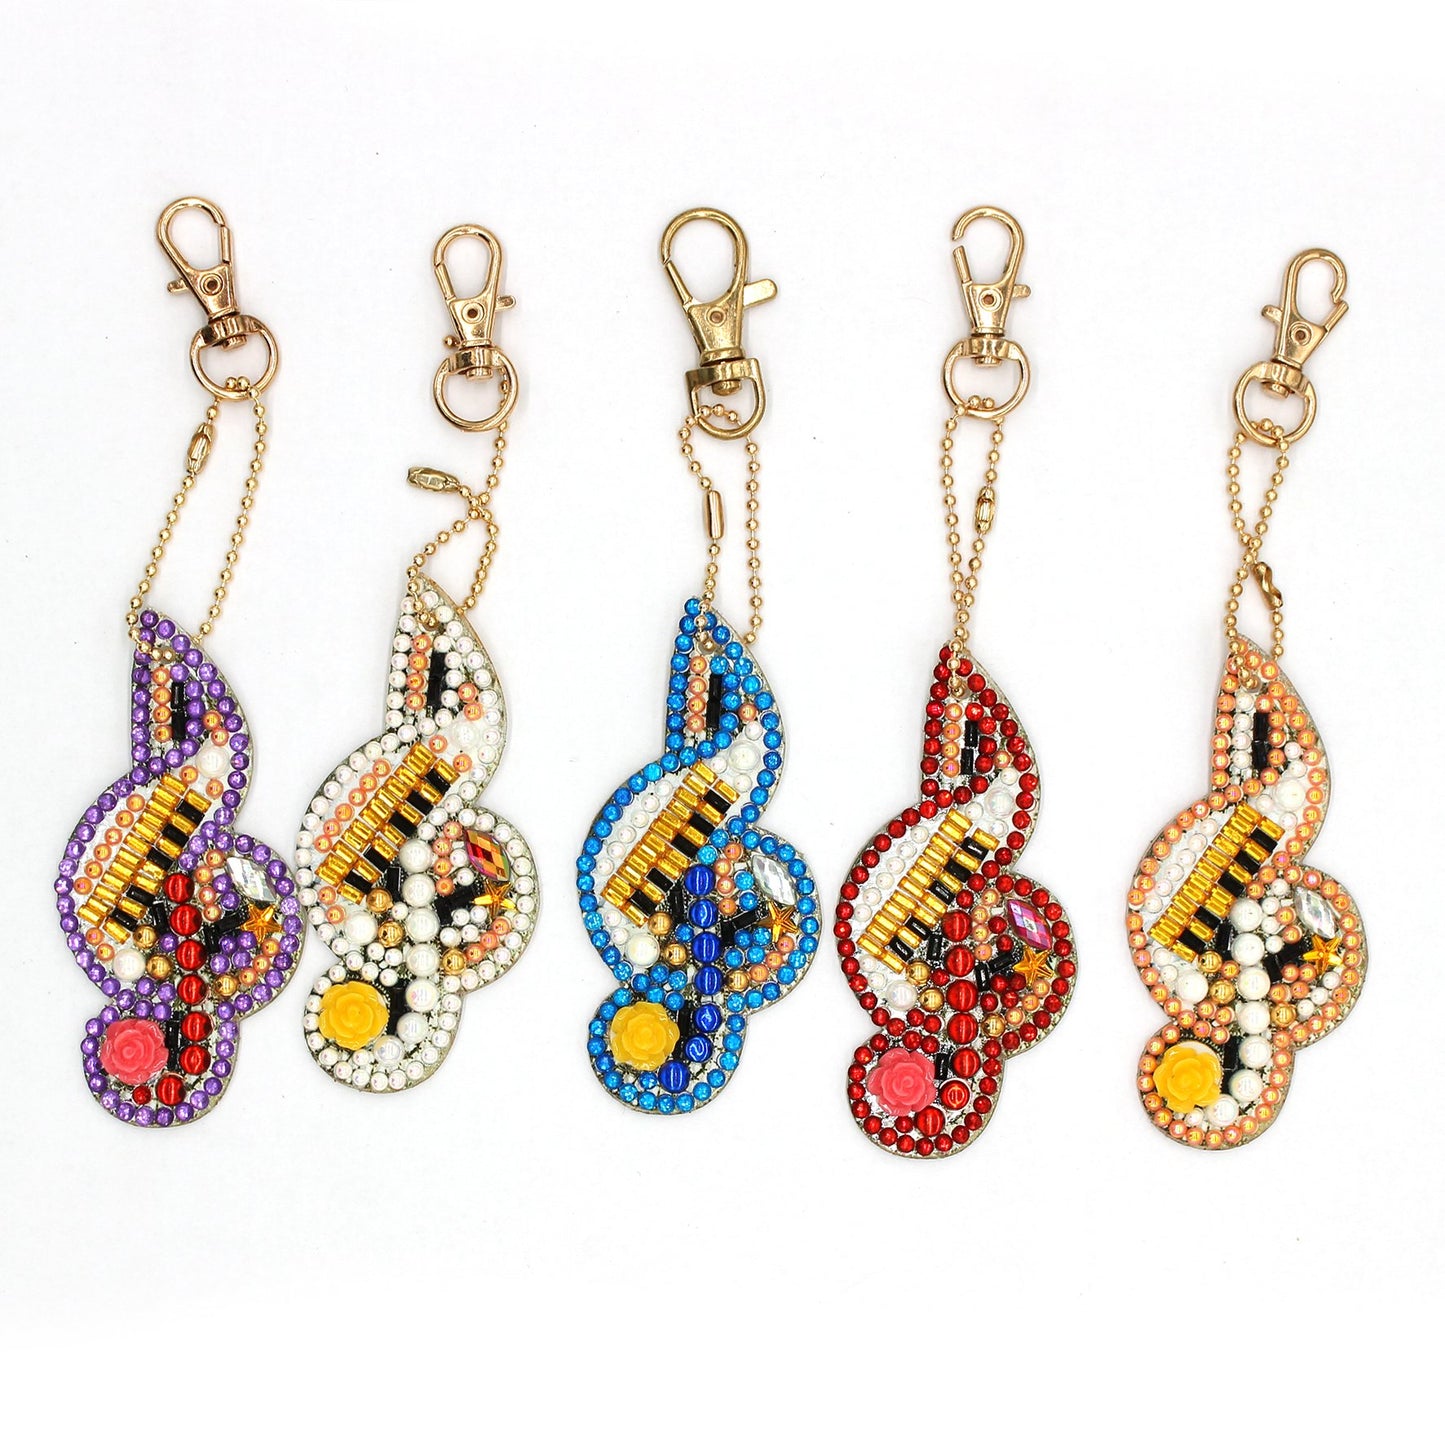 Double-sided stickers special diamond painted keychain key ring-Musical note